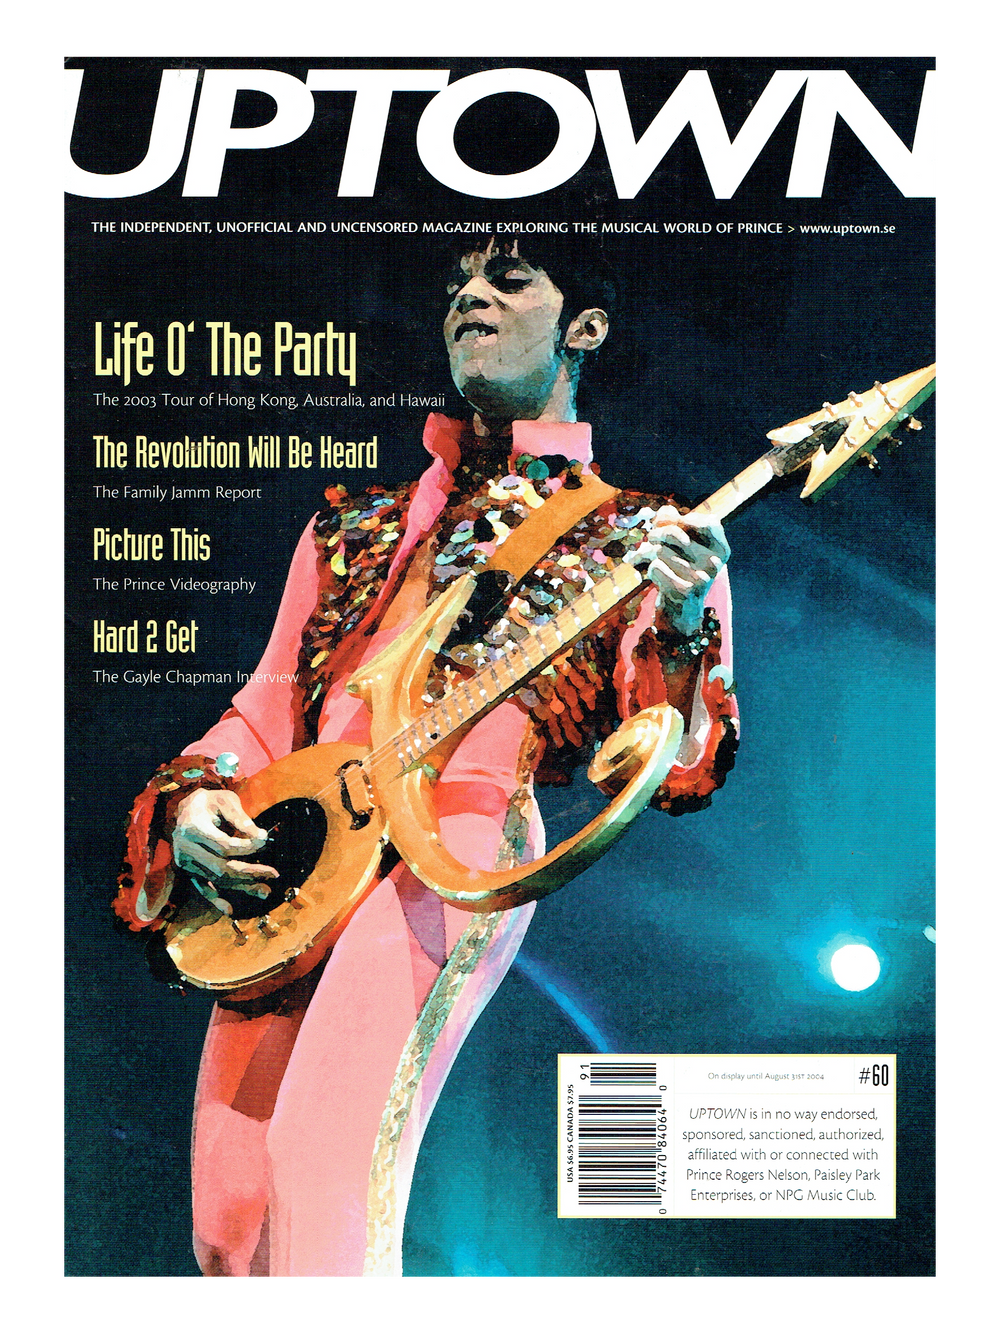 Uptown The Magazine For Prince Fans & Collectors Issue Number 60